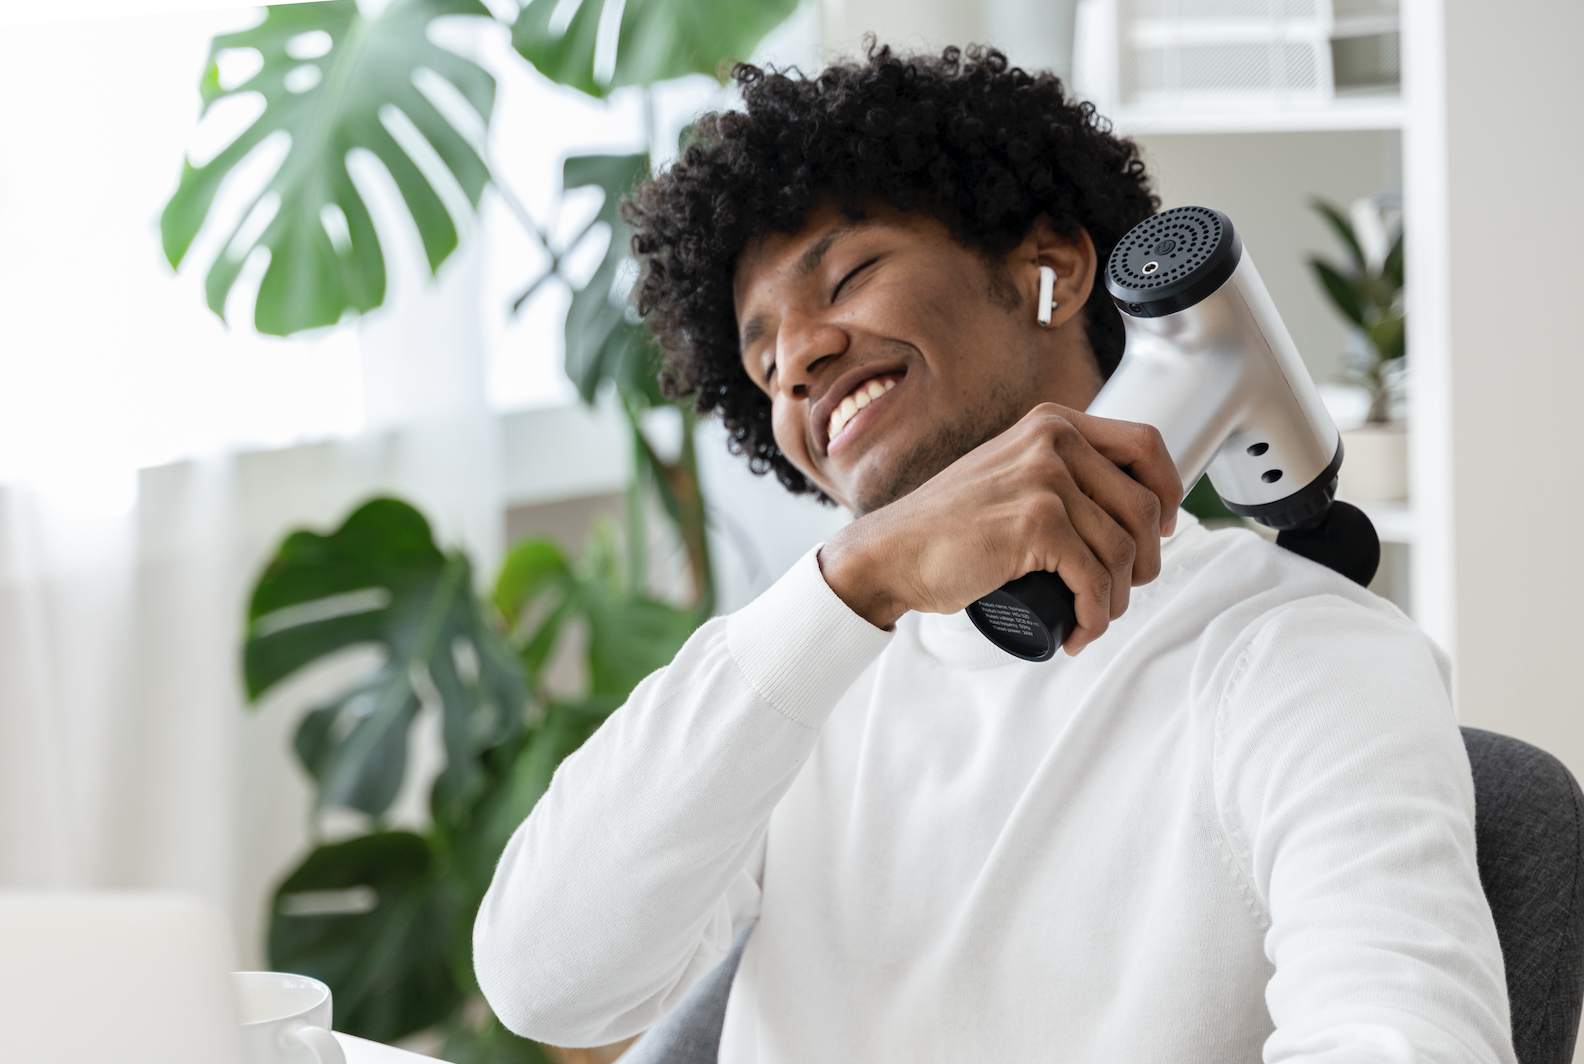 Man using a handheld massager on his neck, eyes closed with a content expression, next to indoor plants